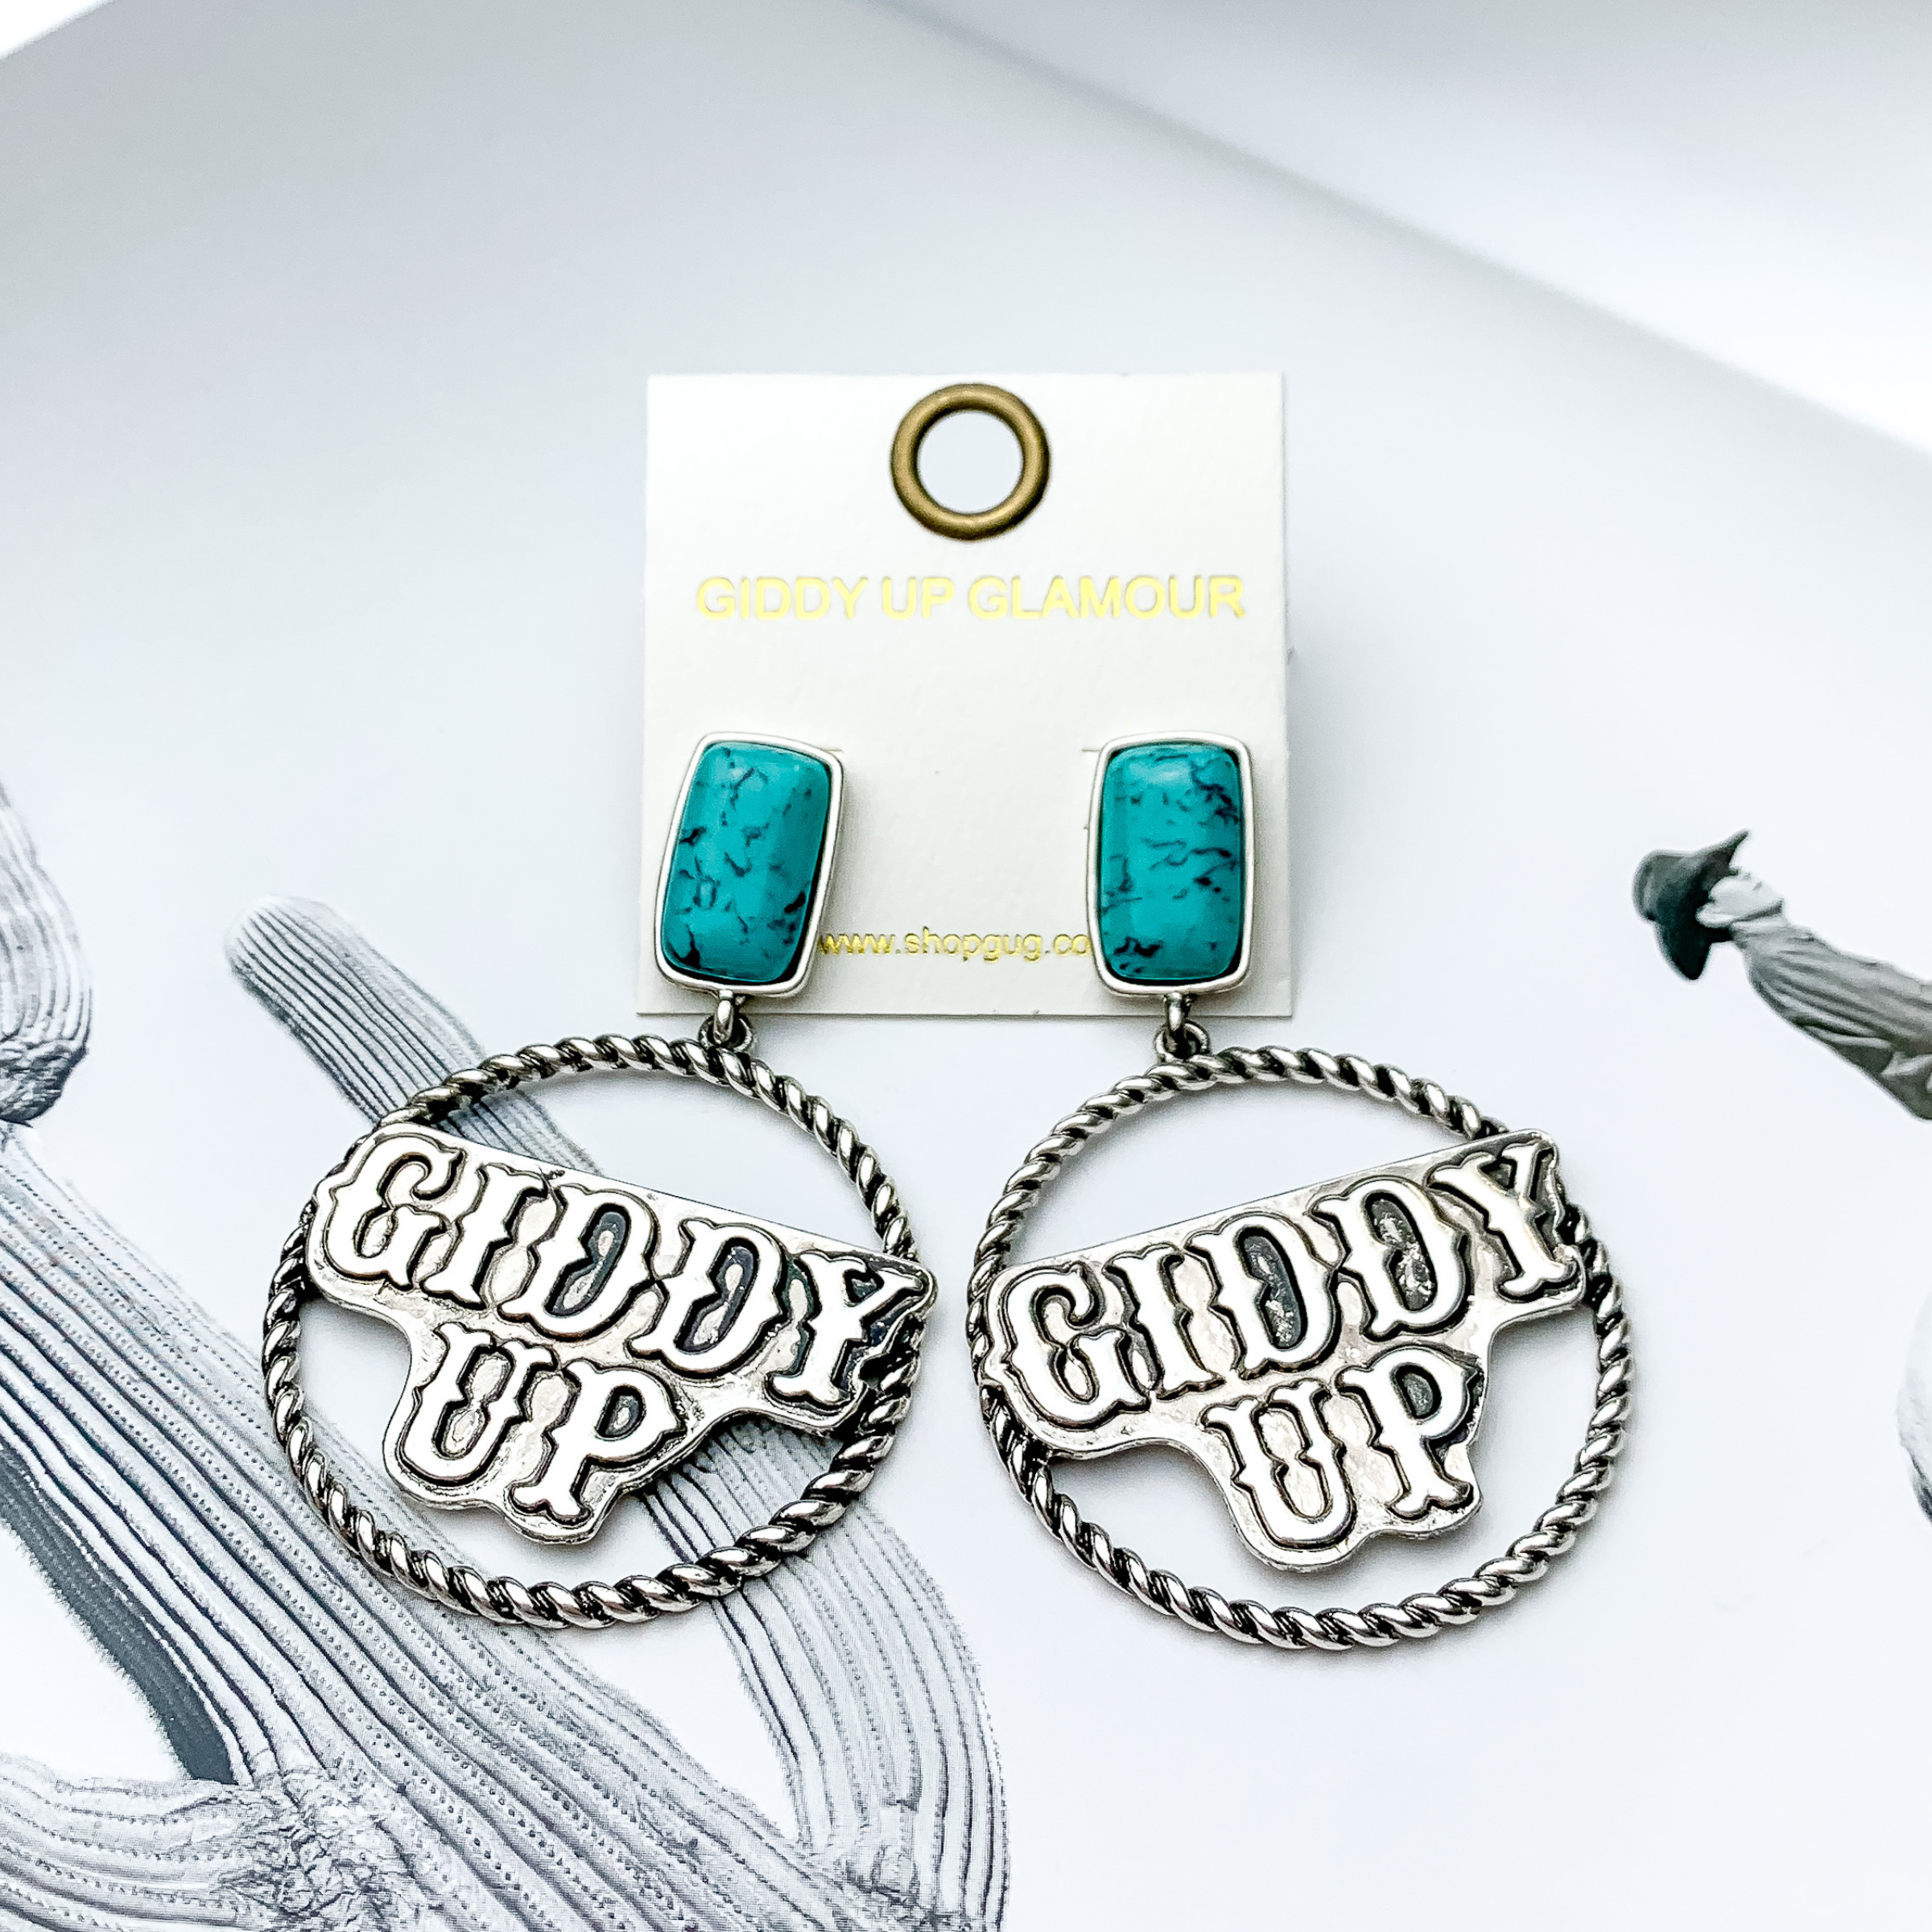 Rectangle turquoise stud earrings with a silver rope hoop drop. In the center of the hoop, there is an engraved pendant that has the words "GIDDY UP" on it. These earrings are pictured on a black and white picture. 